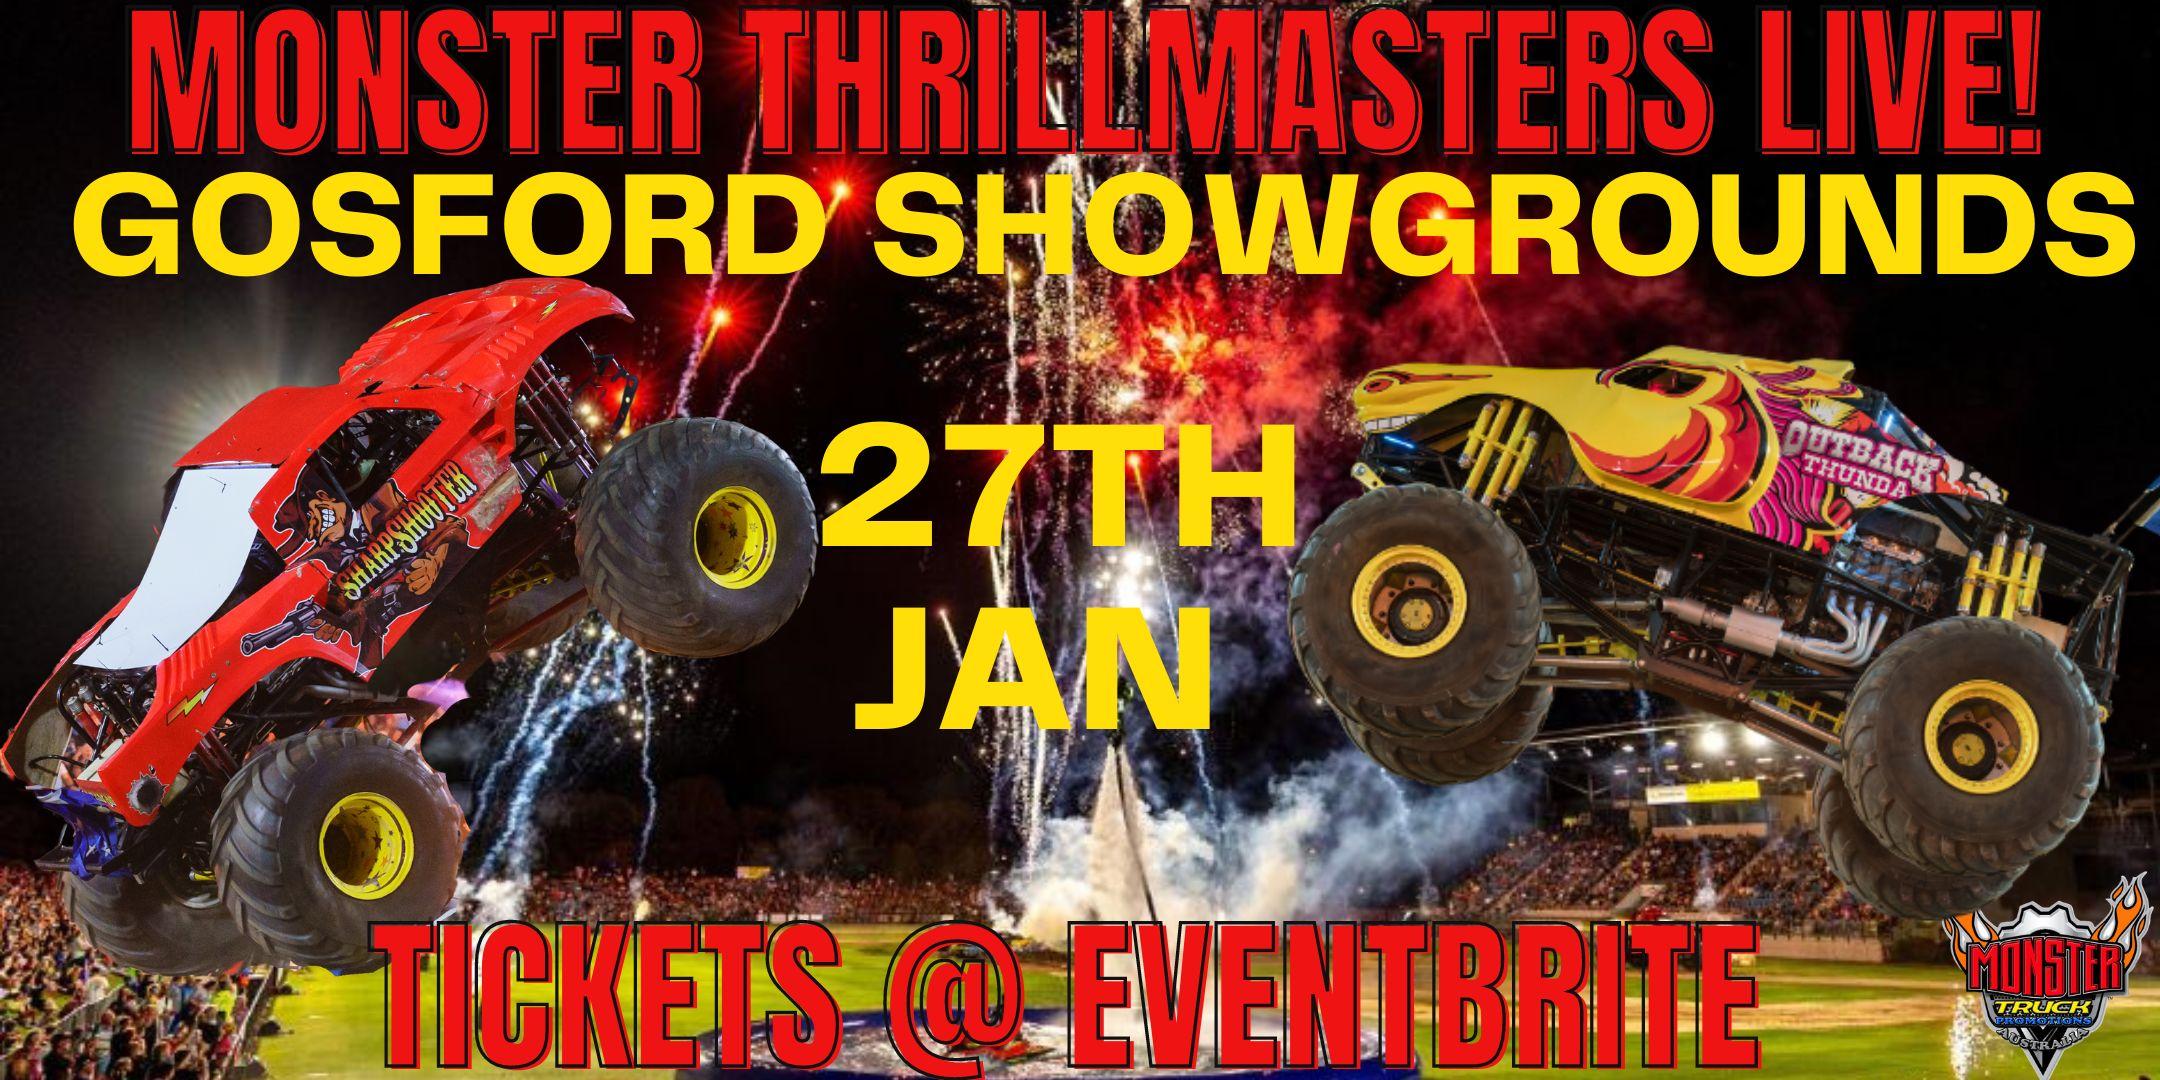 Monster Thrillmasters LIVE Gosford Showgrounds